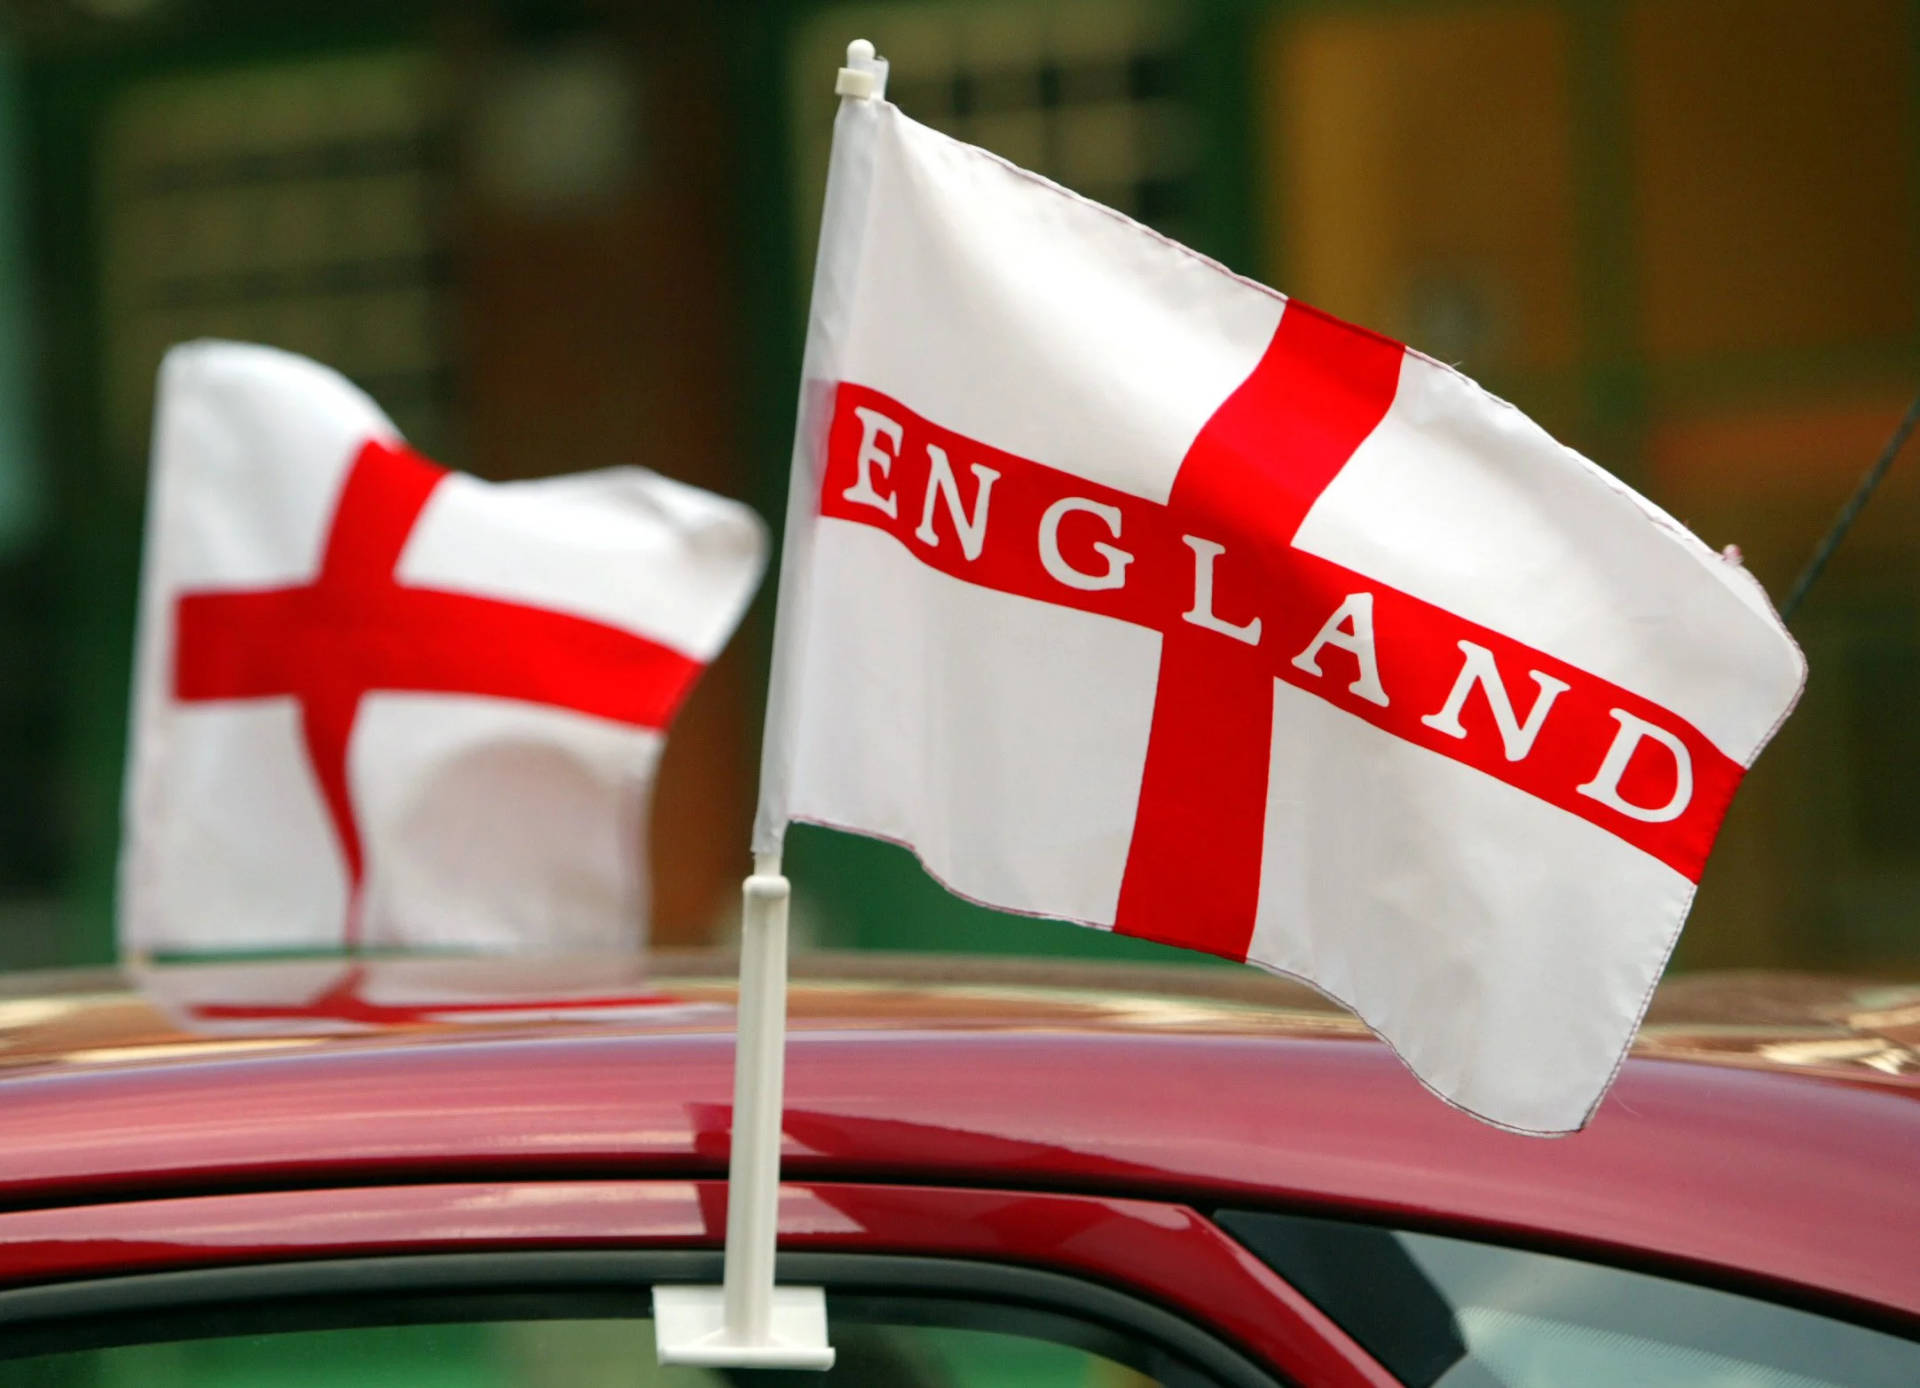 Engaging display of the England flag fluttering against the clear sky Wallpaper